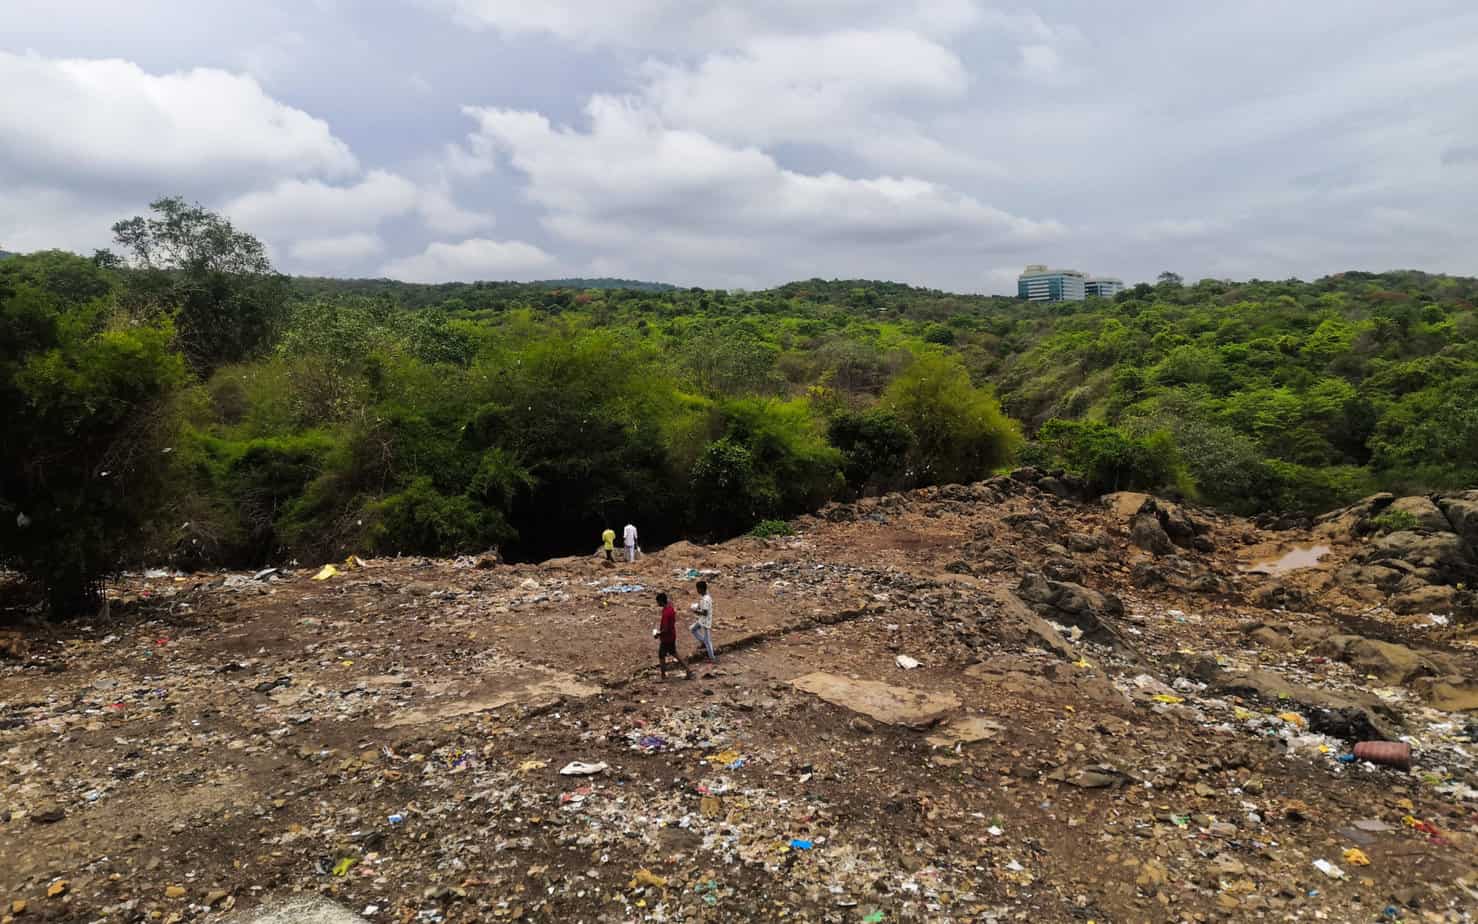 A view of the beginnings of the forest of Sanjay Gandhi National Park, where the empty land meets the thicket